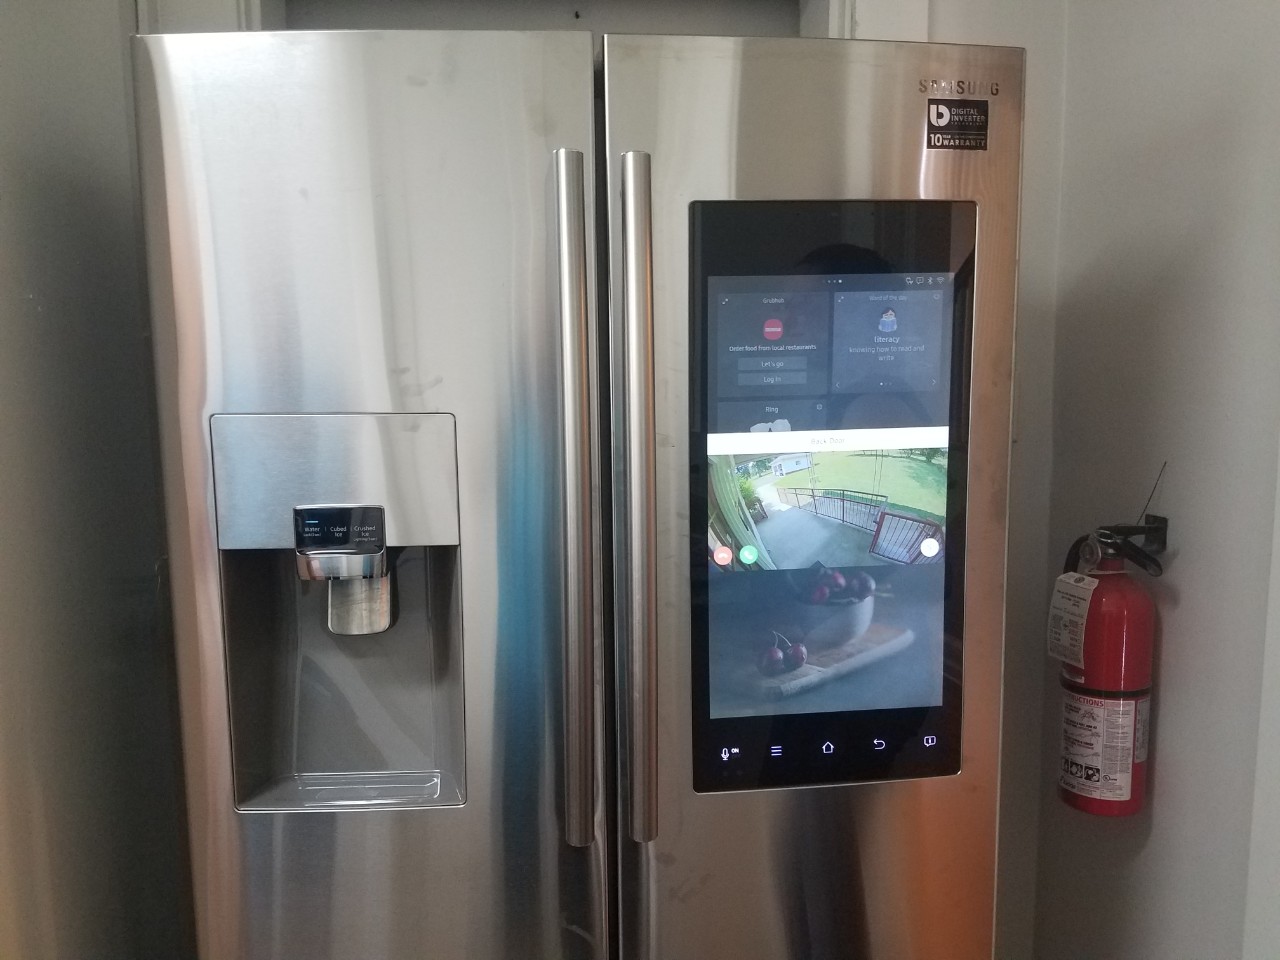 a photo of a stainless steel refrigerator with a large digital panel in one of the doors that shows the view outside the front door from a camera, and has other features where a person can make shopping lists, use a calendar and many many other tech functions